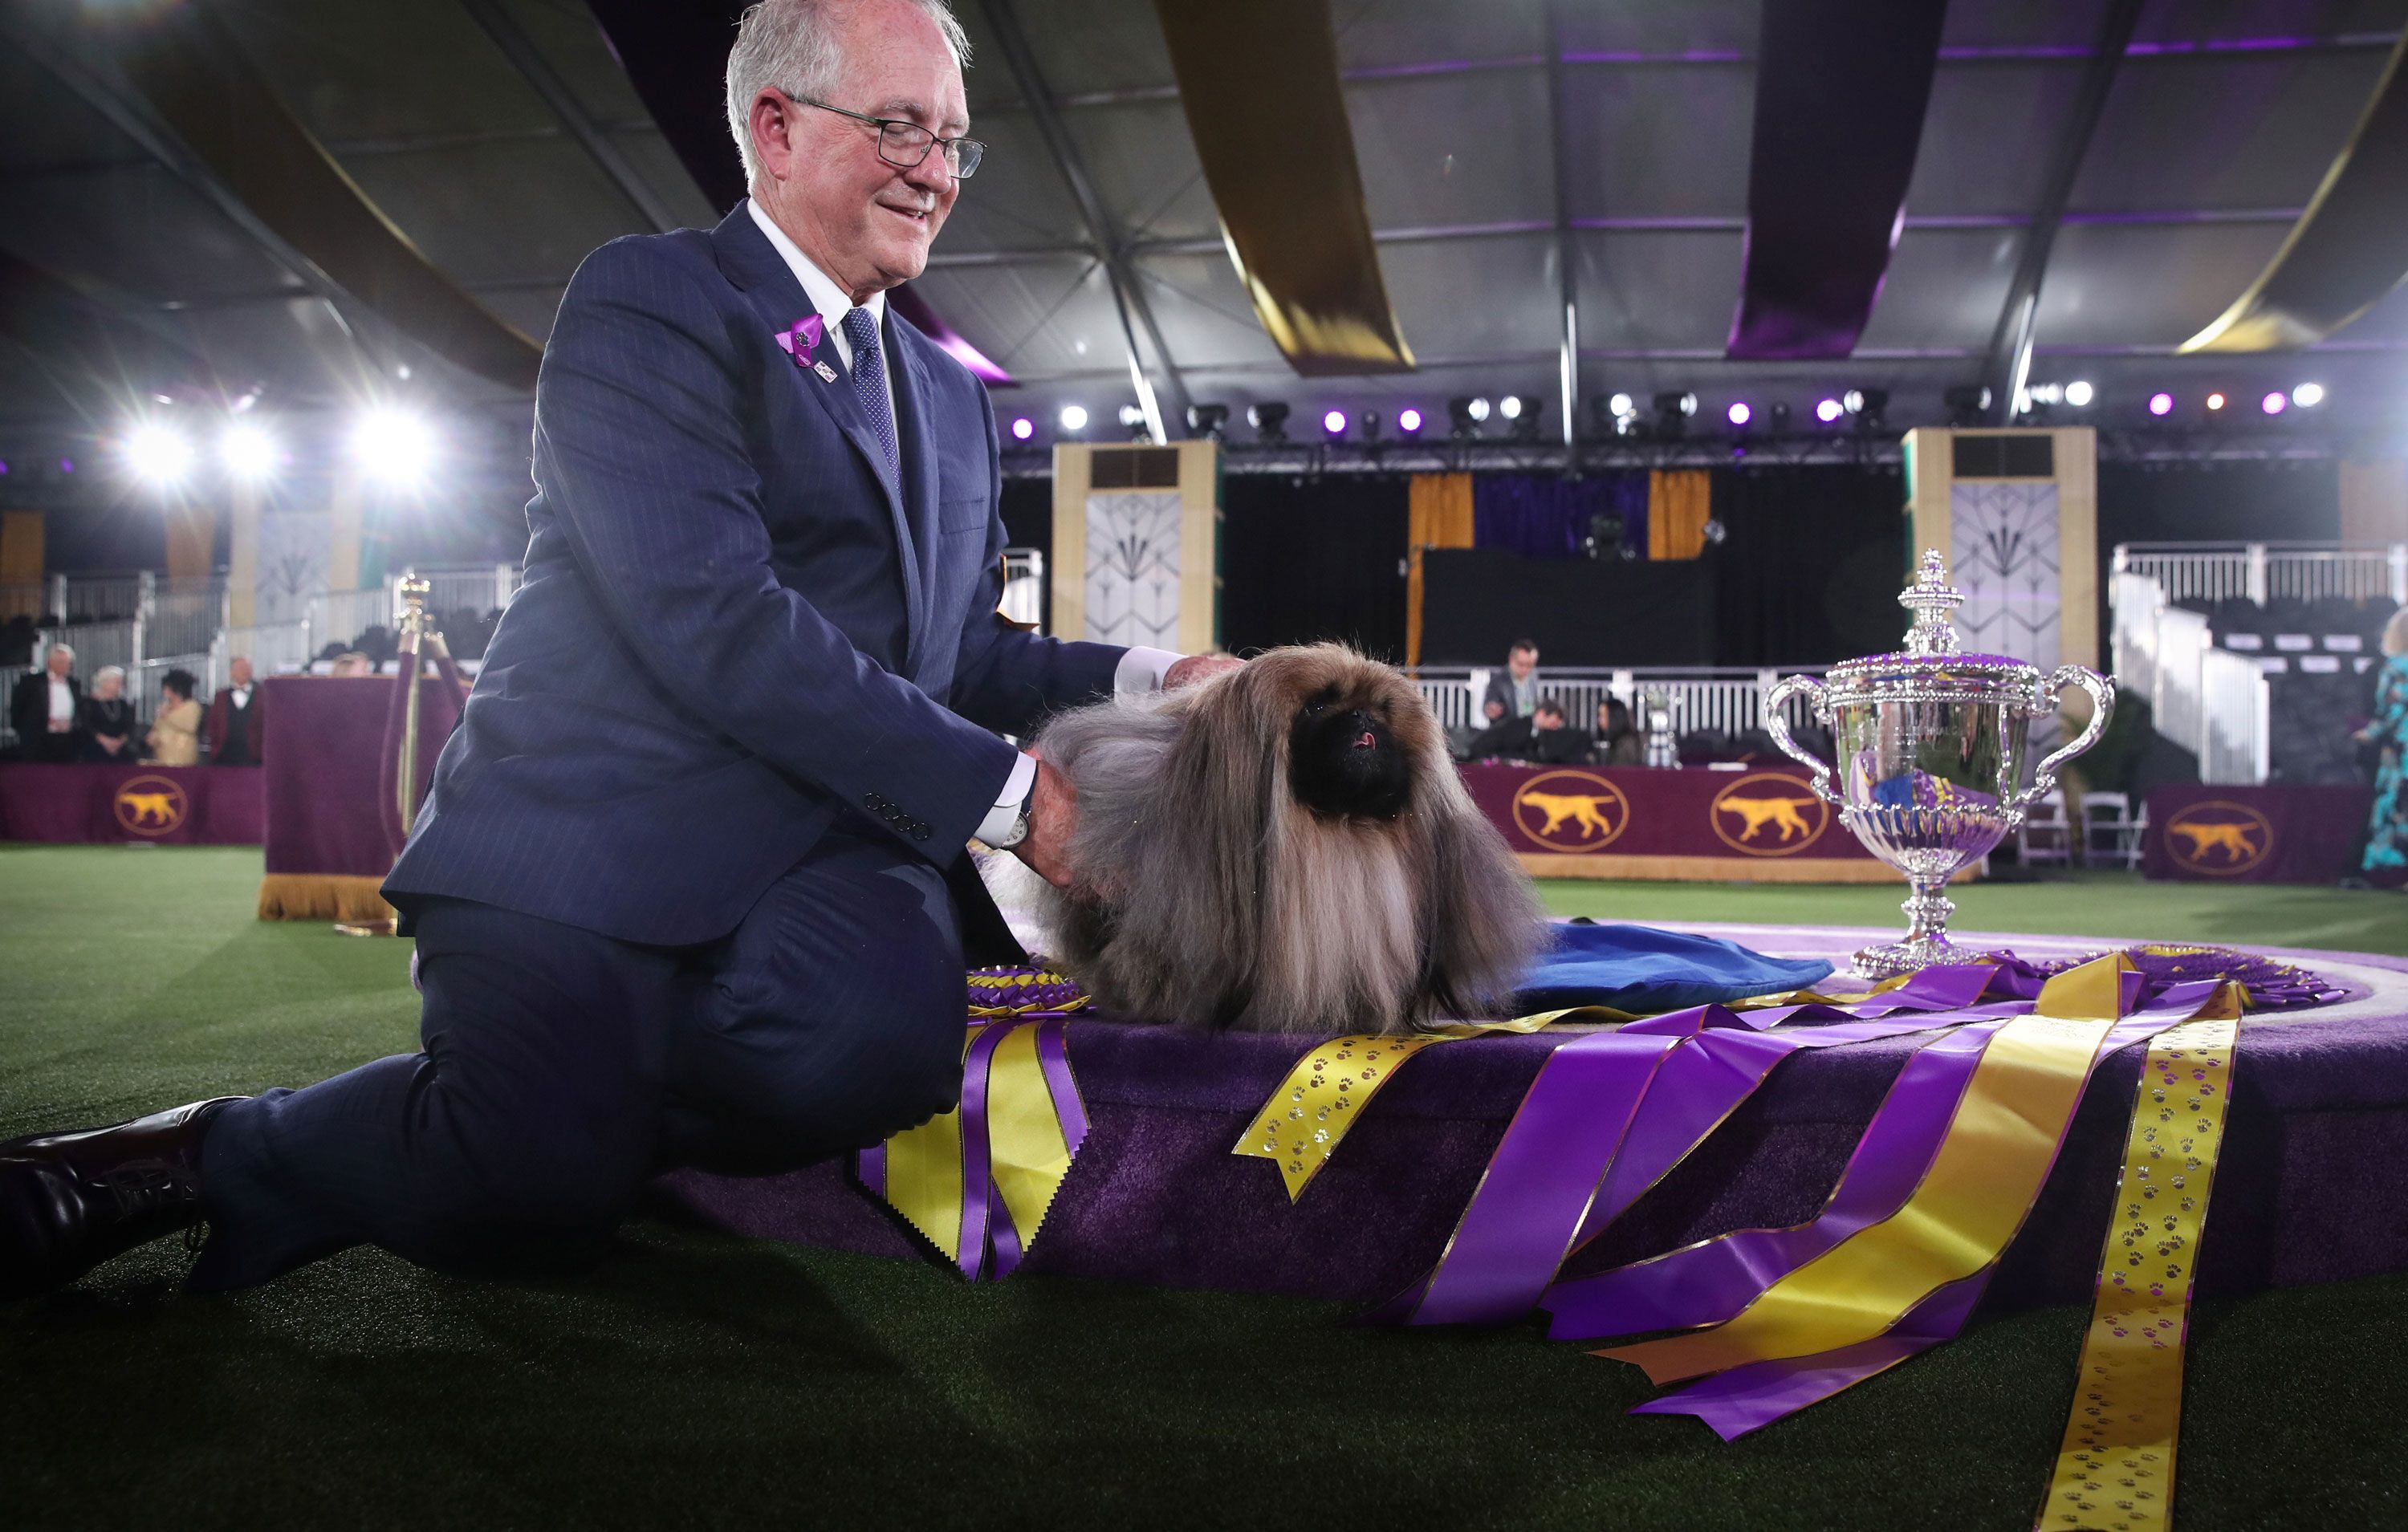 Wasabi the Pekingese sits in the winner's circle with his owner and handler David Fitzpatrick after winning Best in Show at the 145th Annual Westminster Kennel Club Dog Show on June 13, 2021, in Tarrytown, New York. Because of Covid-19, only dog owners and handlers were able to attend this year's event -- no spectators were allowed.